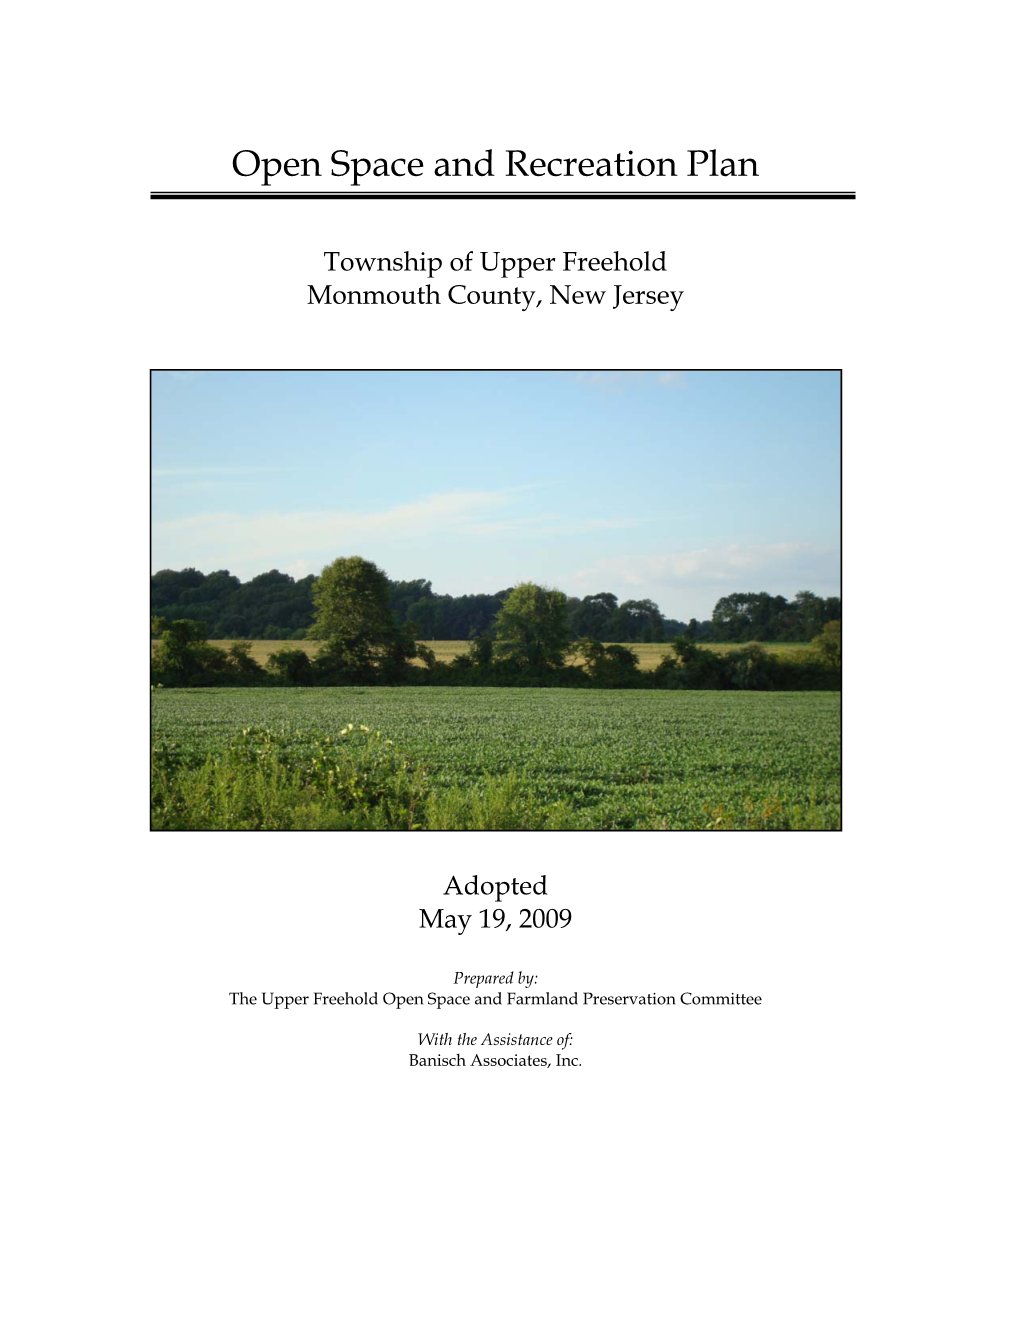 Upper Freehold Township Open Space & Recreation Plan